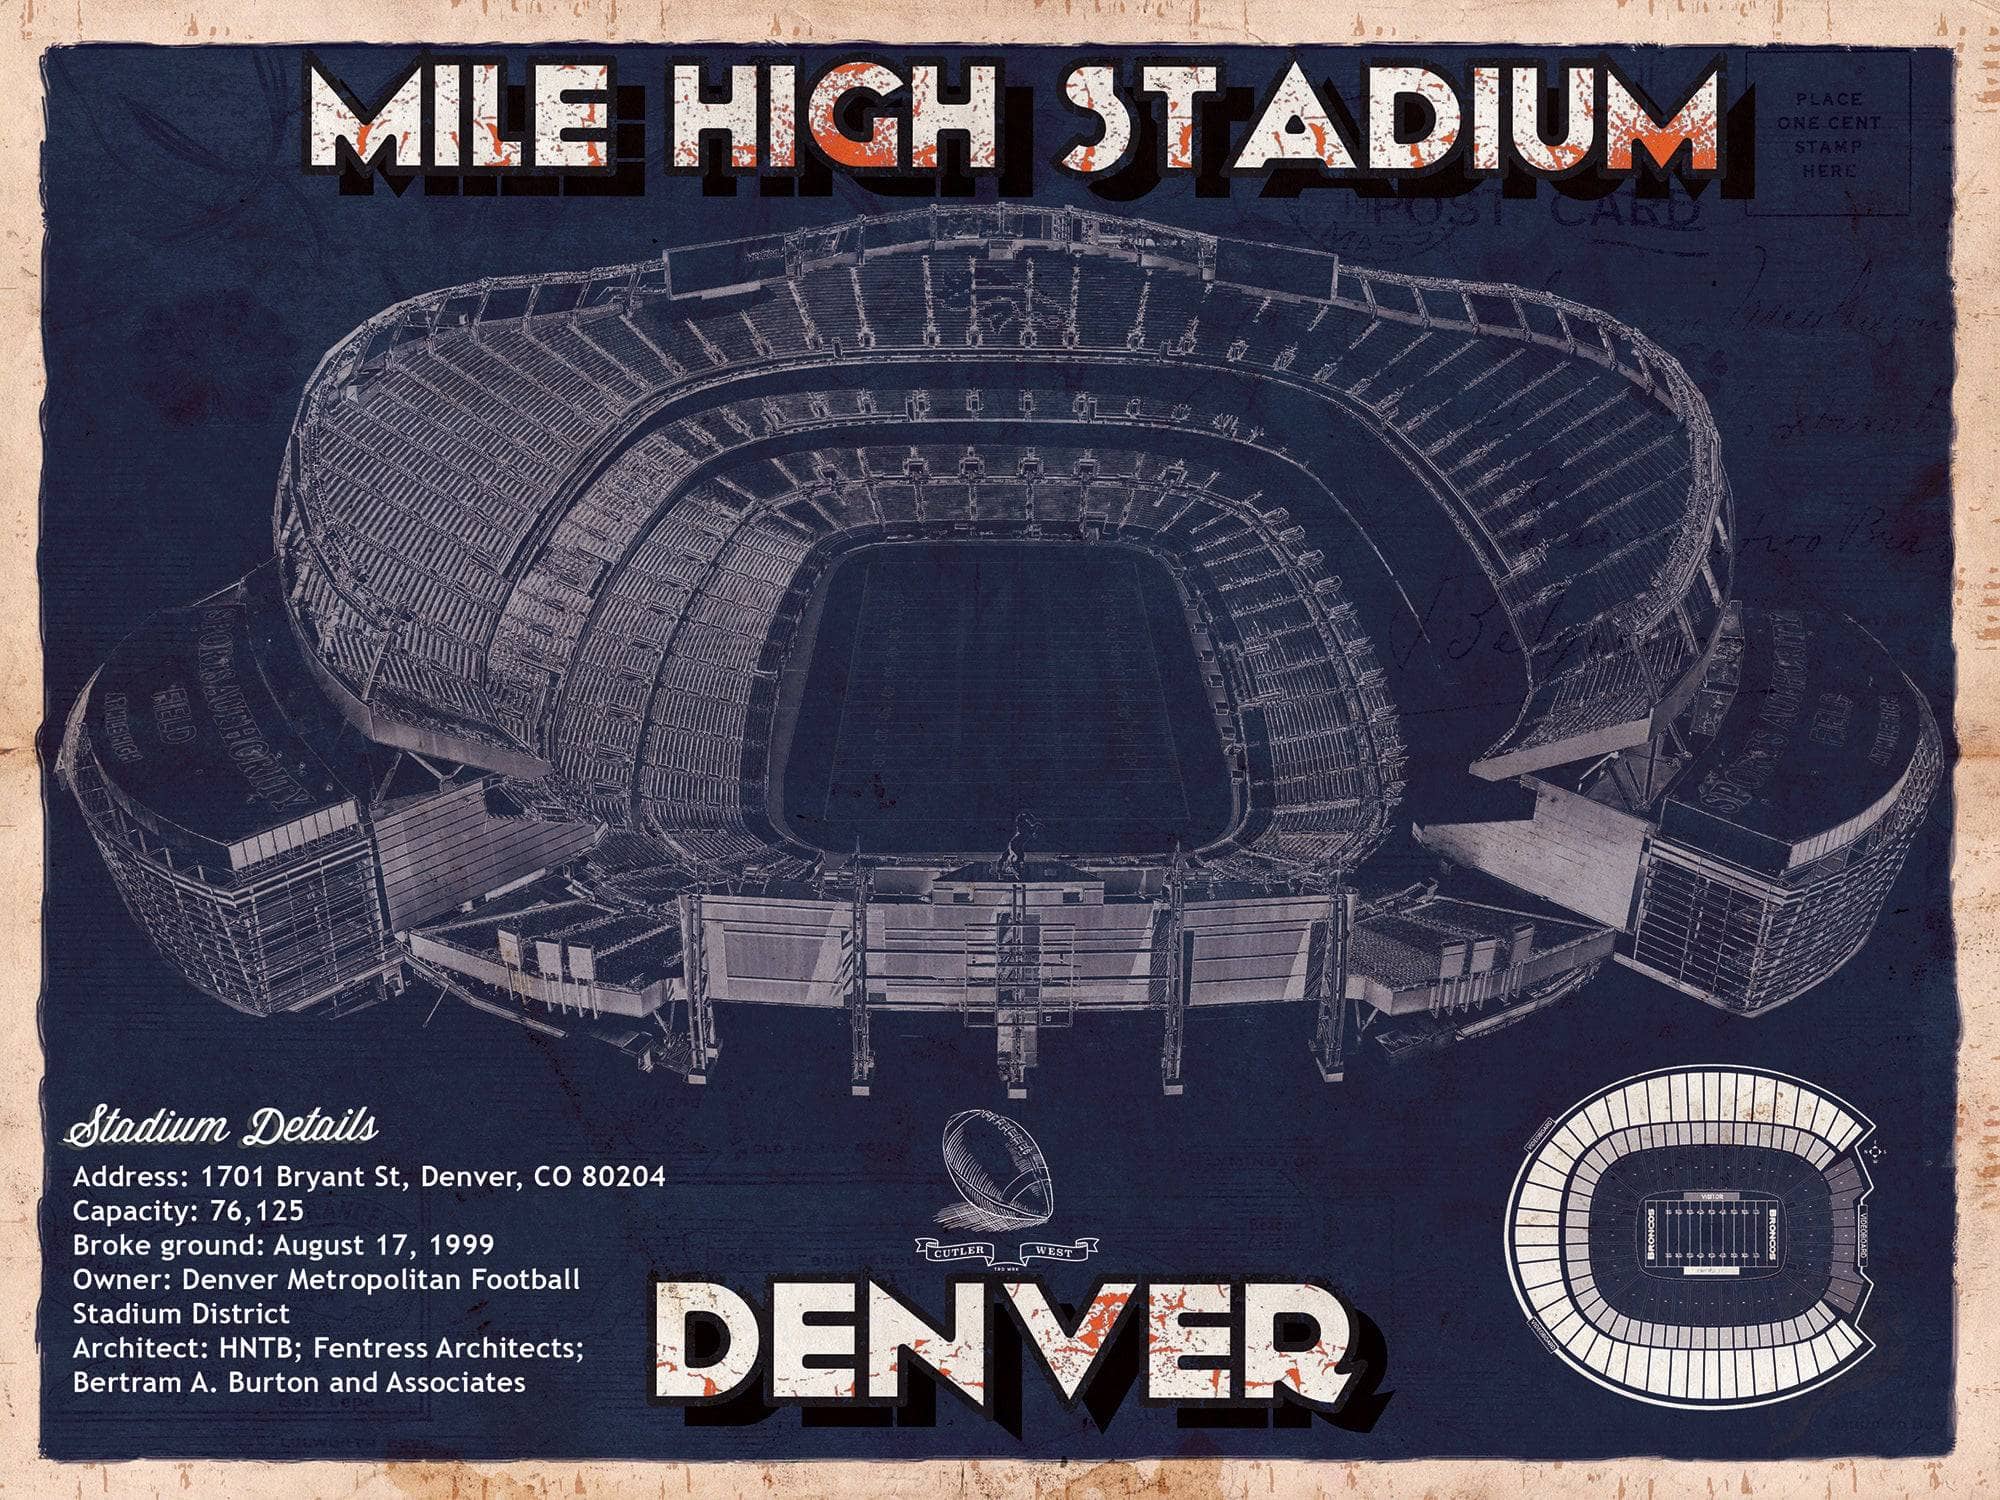 Cutler West Pro Football Collection 14" x 11" / Unframed Denver Broncos Vintage Sports Authority Field - Vintage Football Print 635800348-TOP_55469